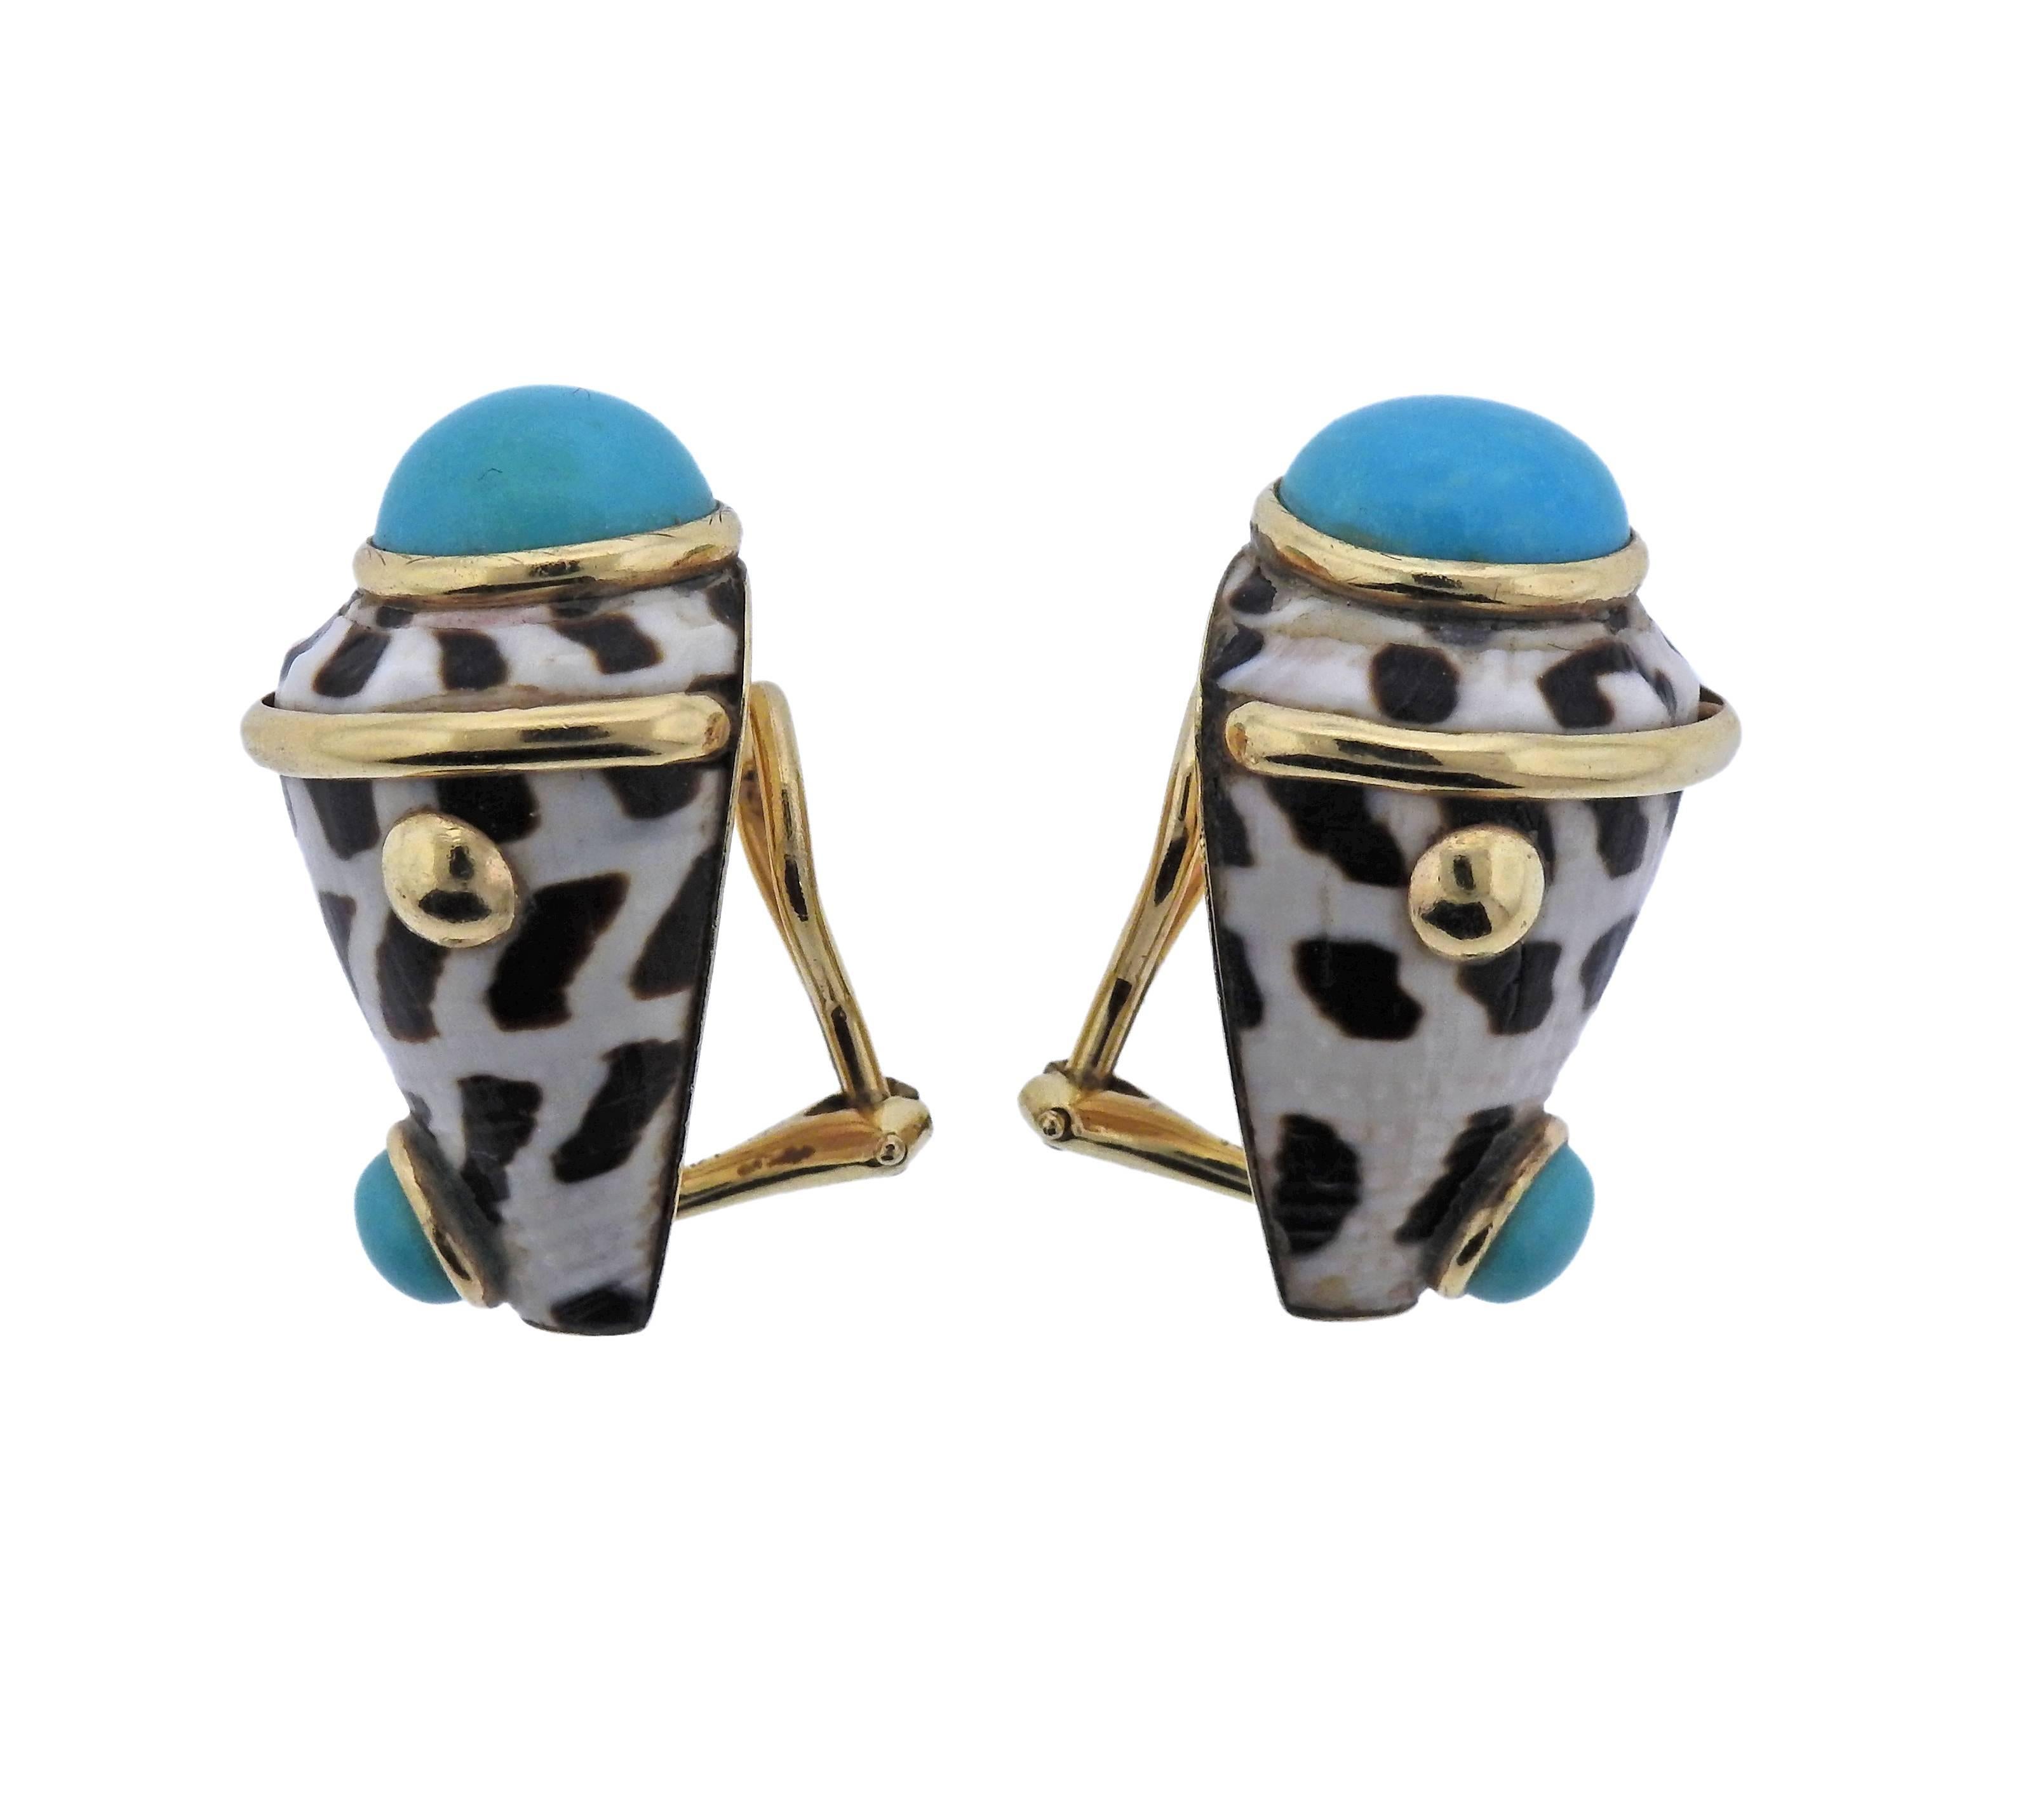 Pair of 14k yellow gold earrings by Maz, set with shell and turquoise. Earrings are 25mm x 18mm, weigh 14.6 grams. Marked: MAZ, 14k.